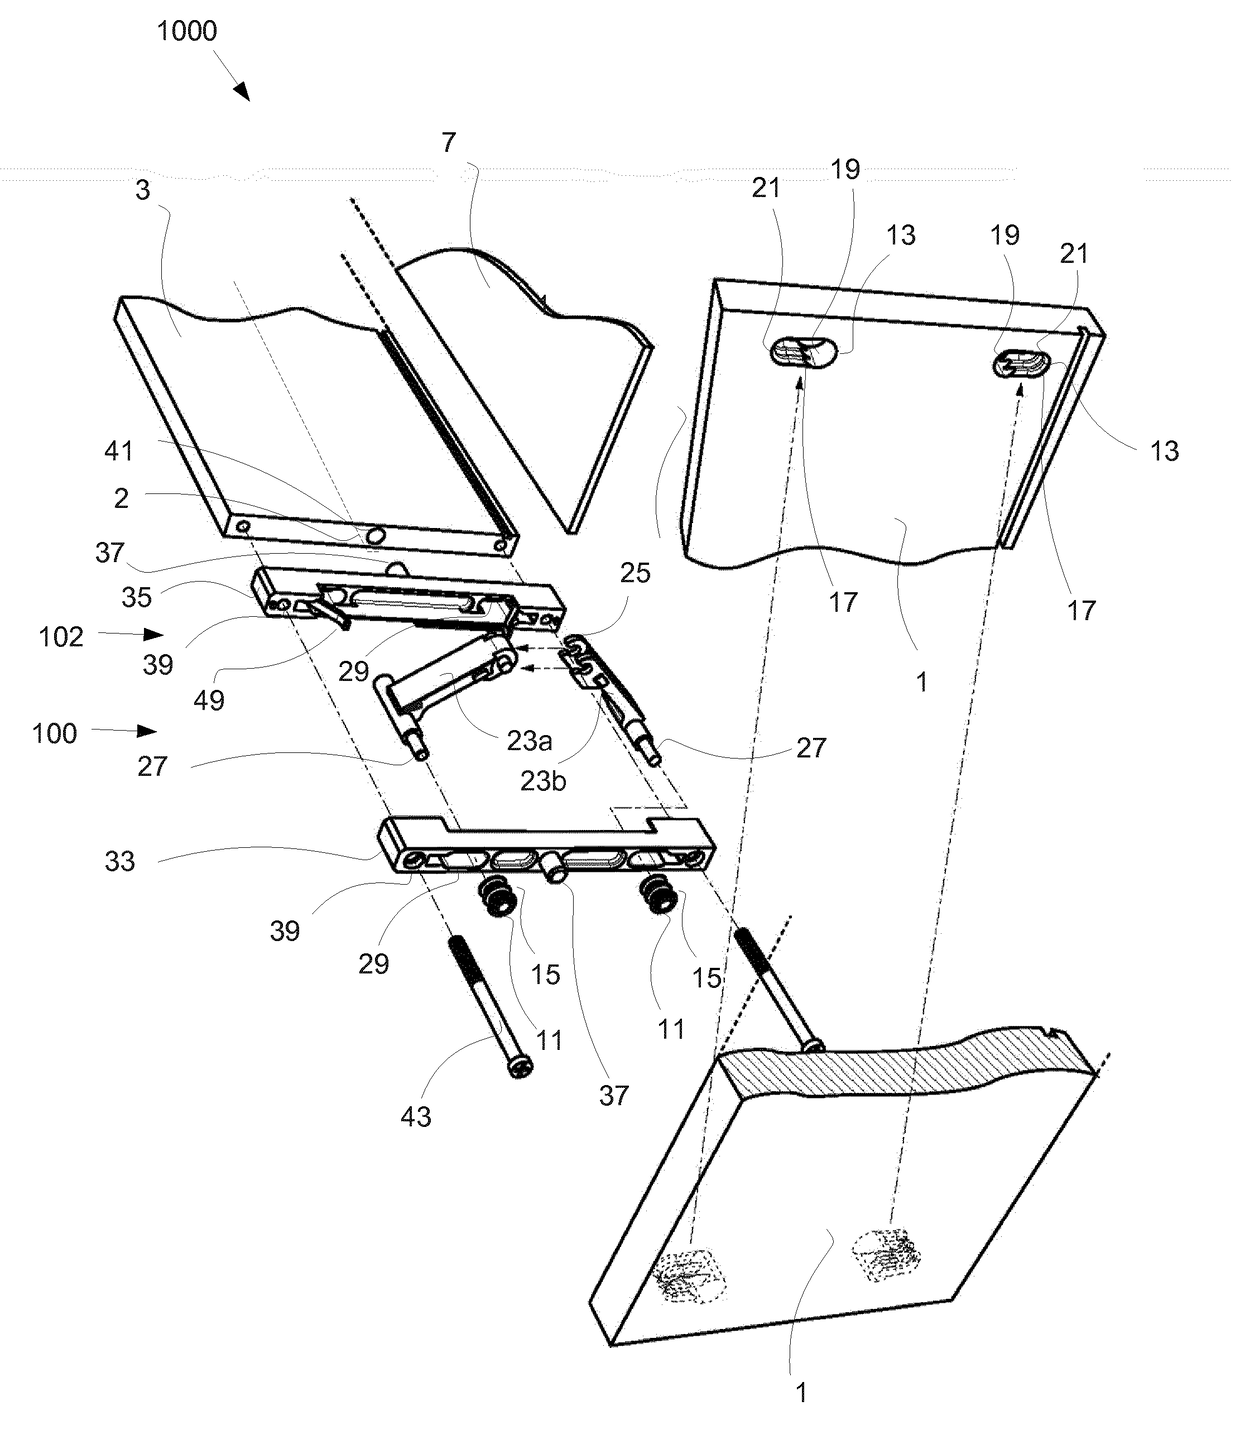 Fastening device for a furniture panel